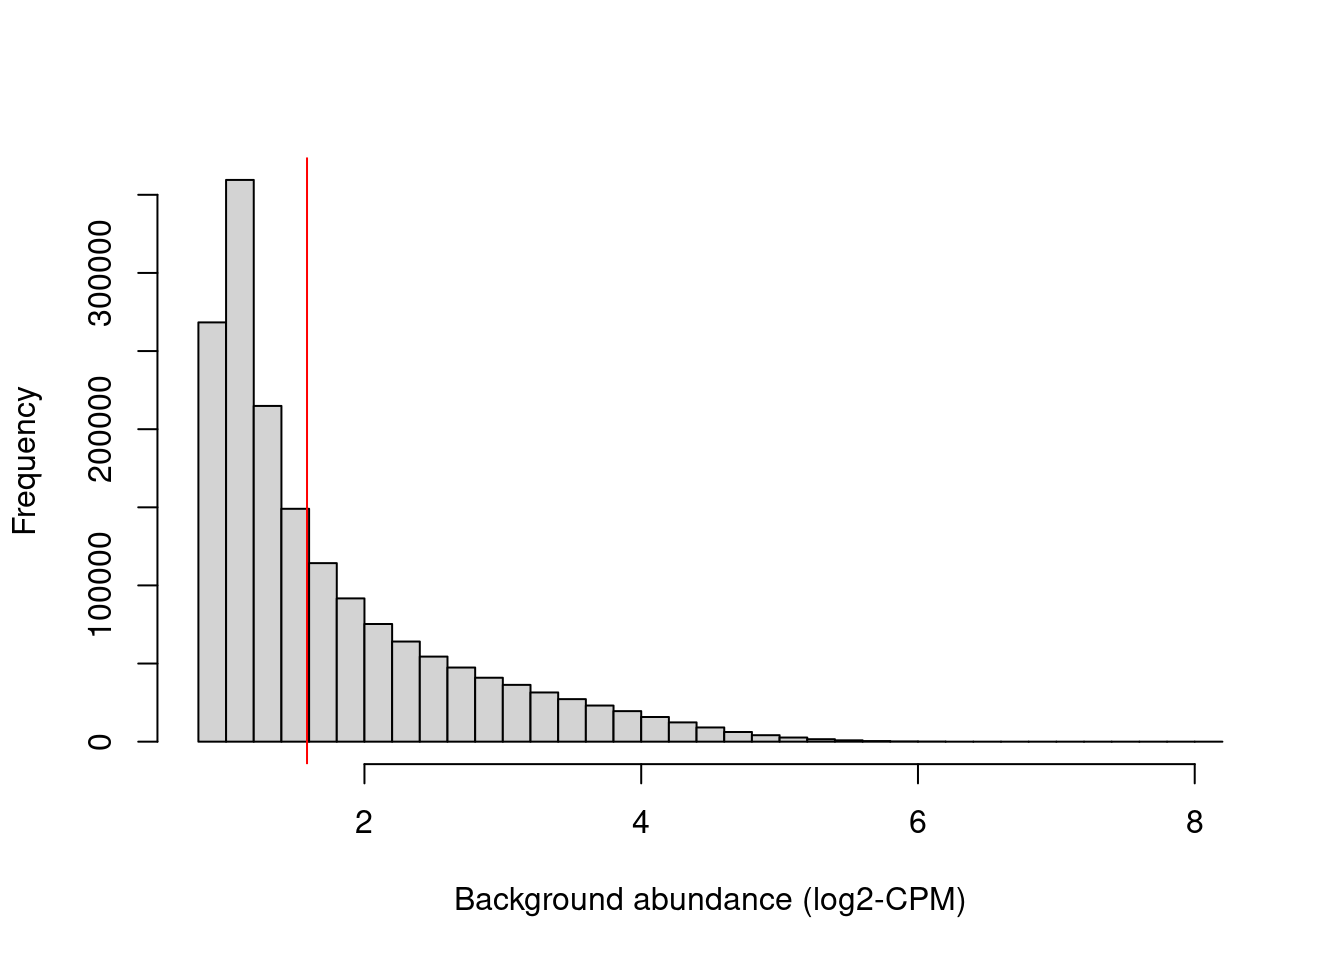 Histogram of average abundances across all 2 kbp genomic bins. The filter threshold is shown as the red line.